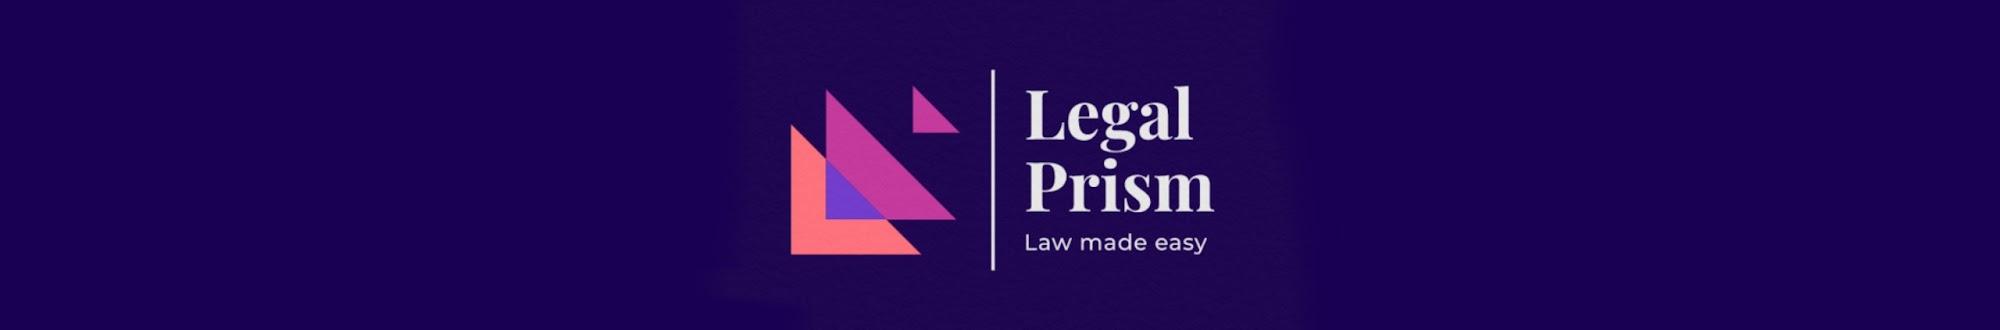 Legal Prism Law made easy